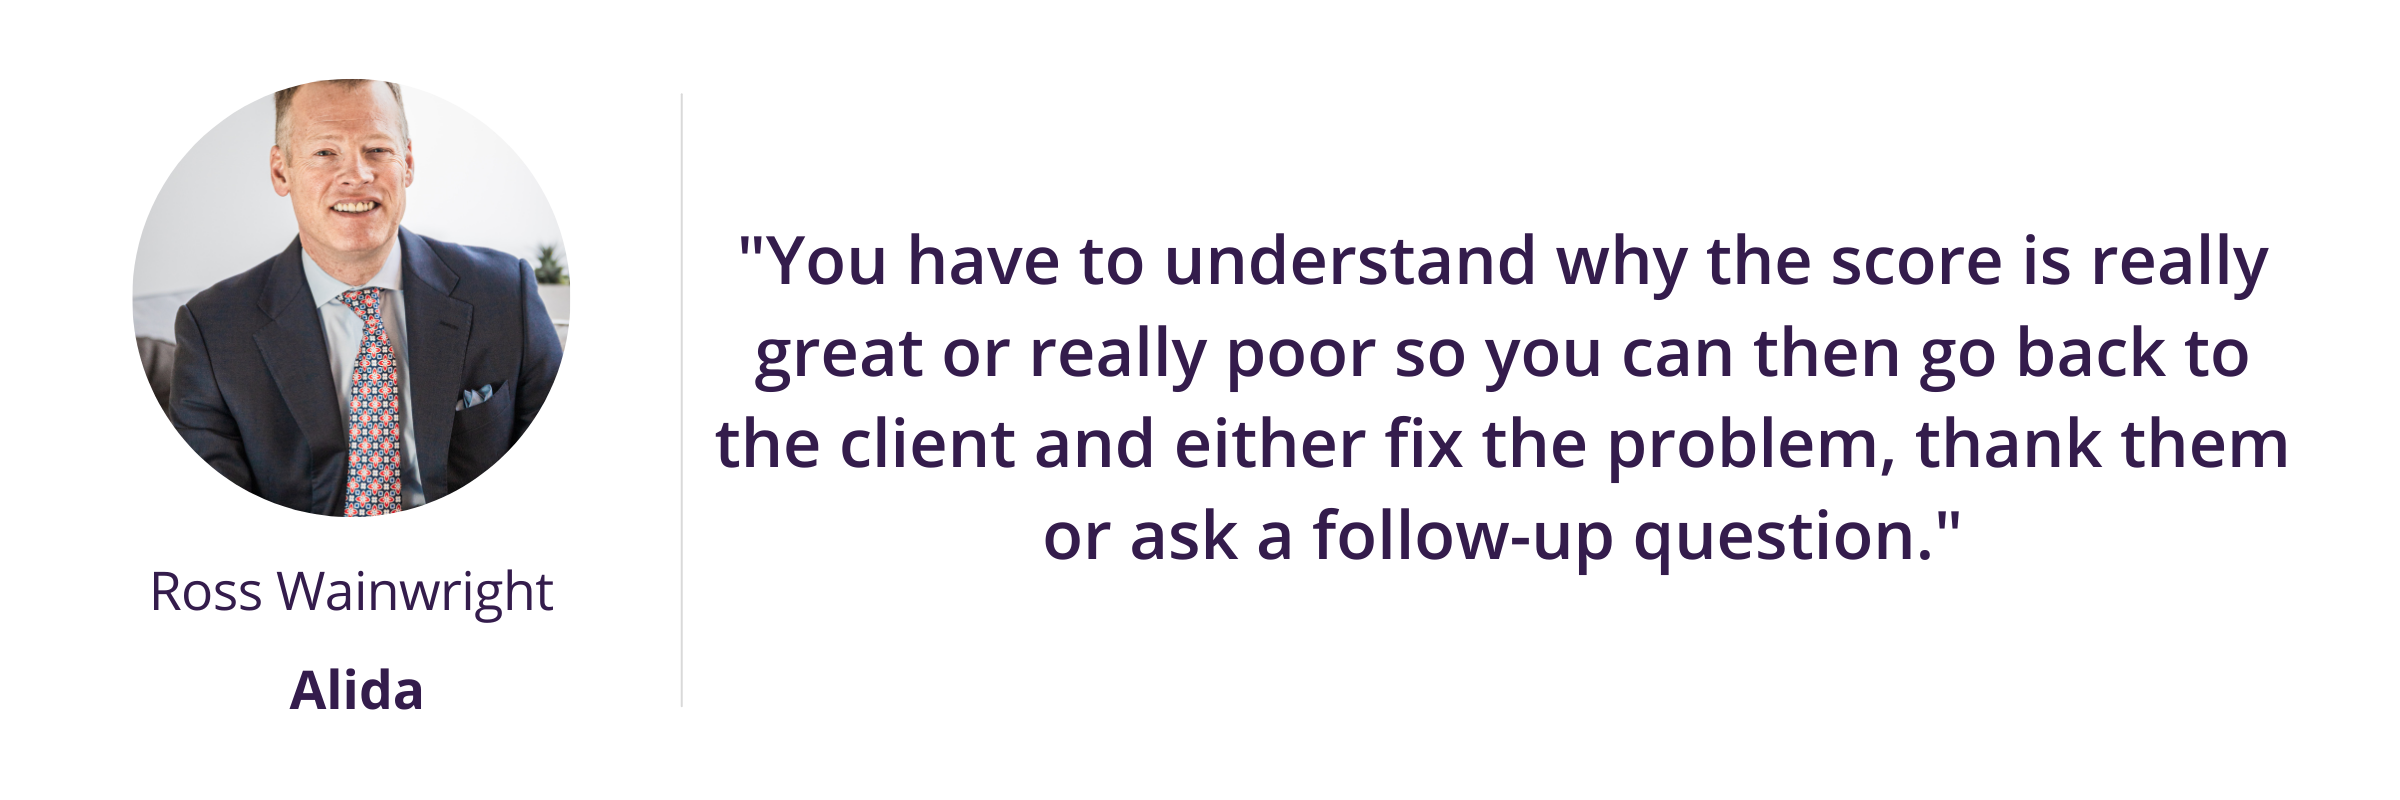 You have to understand why the score is really great or really poor so you can then go back to the client and either fix the problem, thank them or ask a follow-up question.